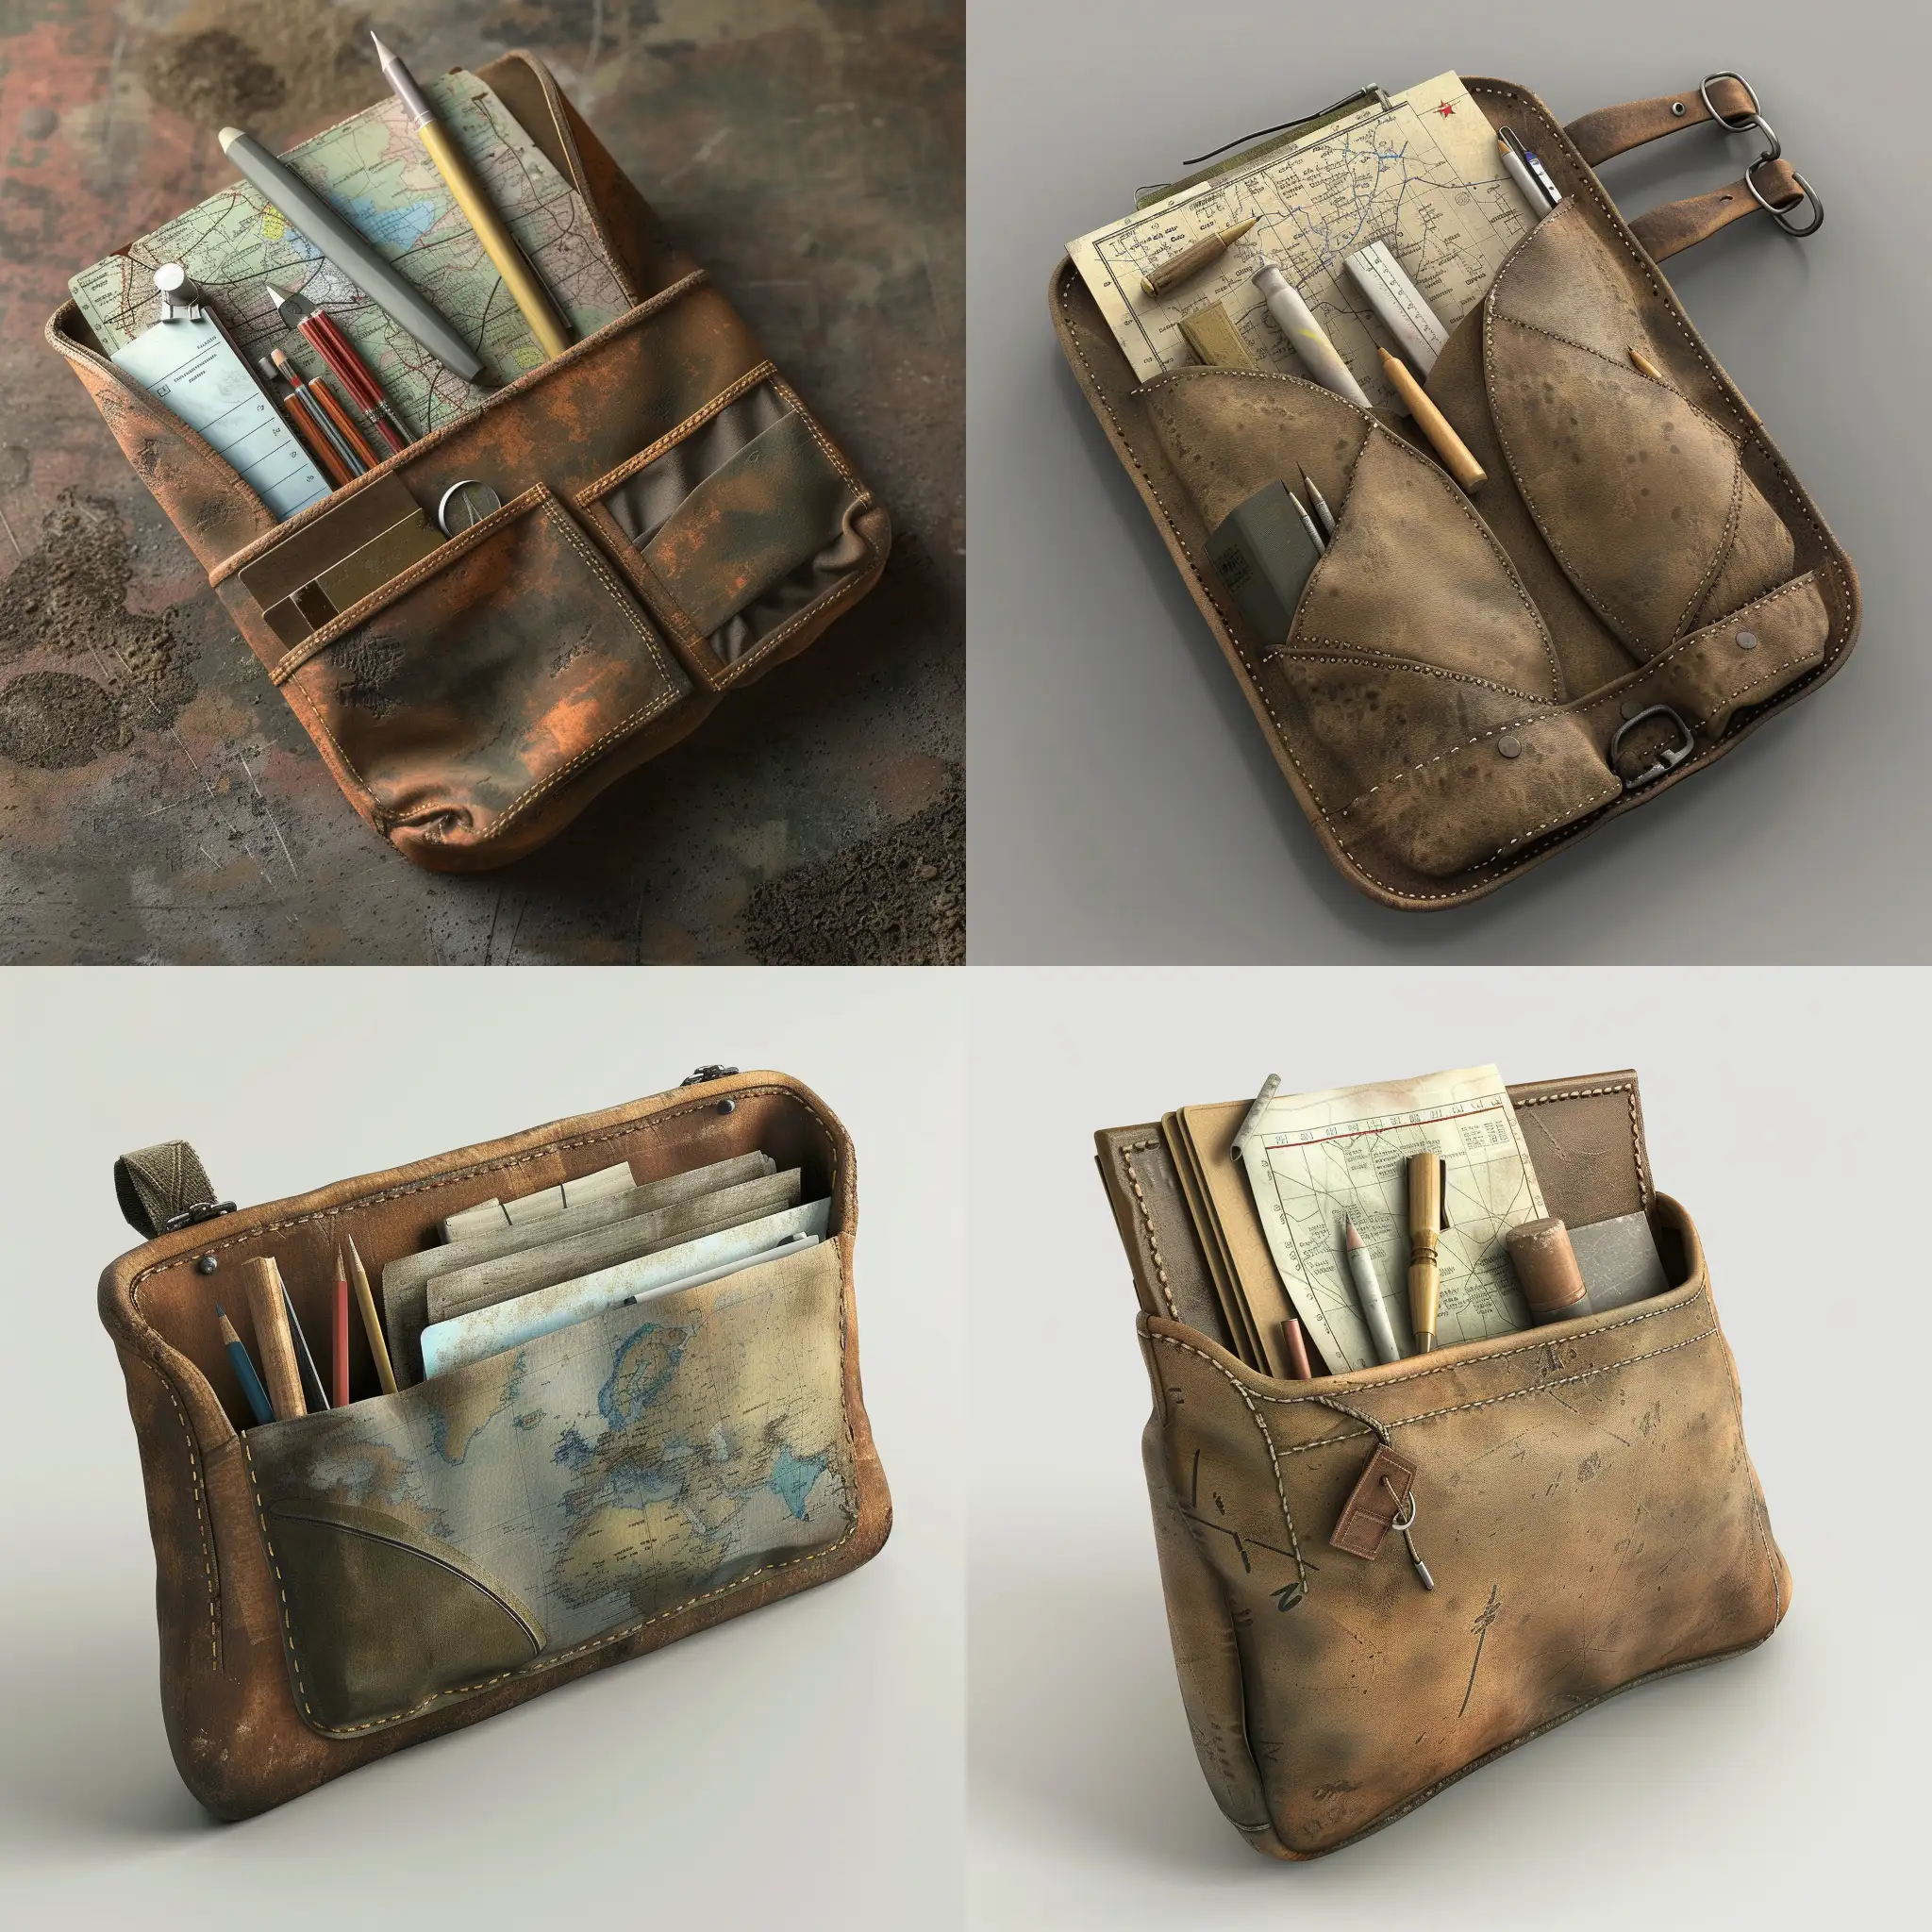 Realistic-Isometric-Military-Cartographic-Kit-in-Soviet-Leather-Pouch